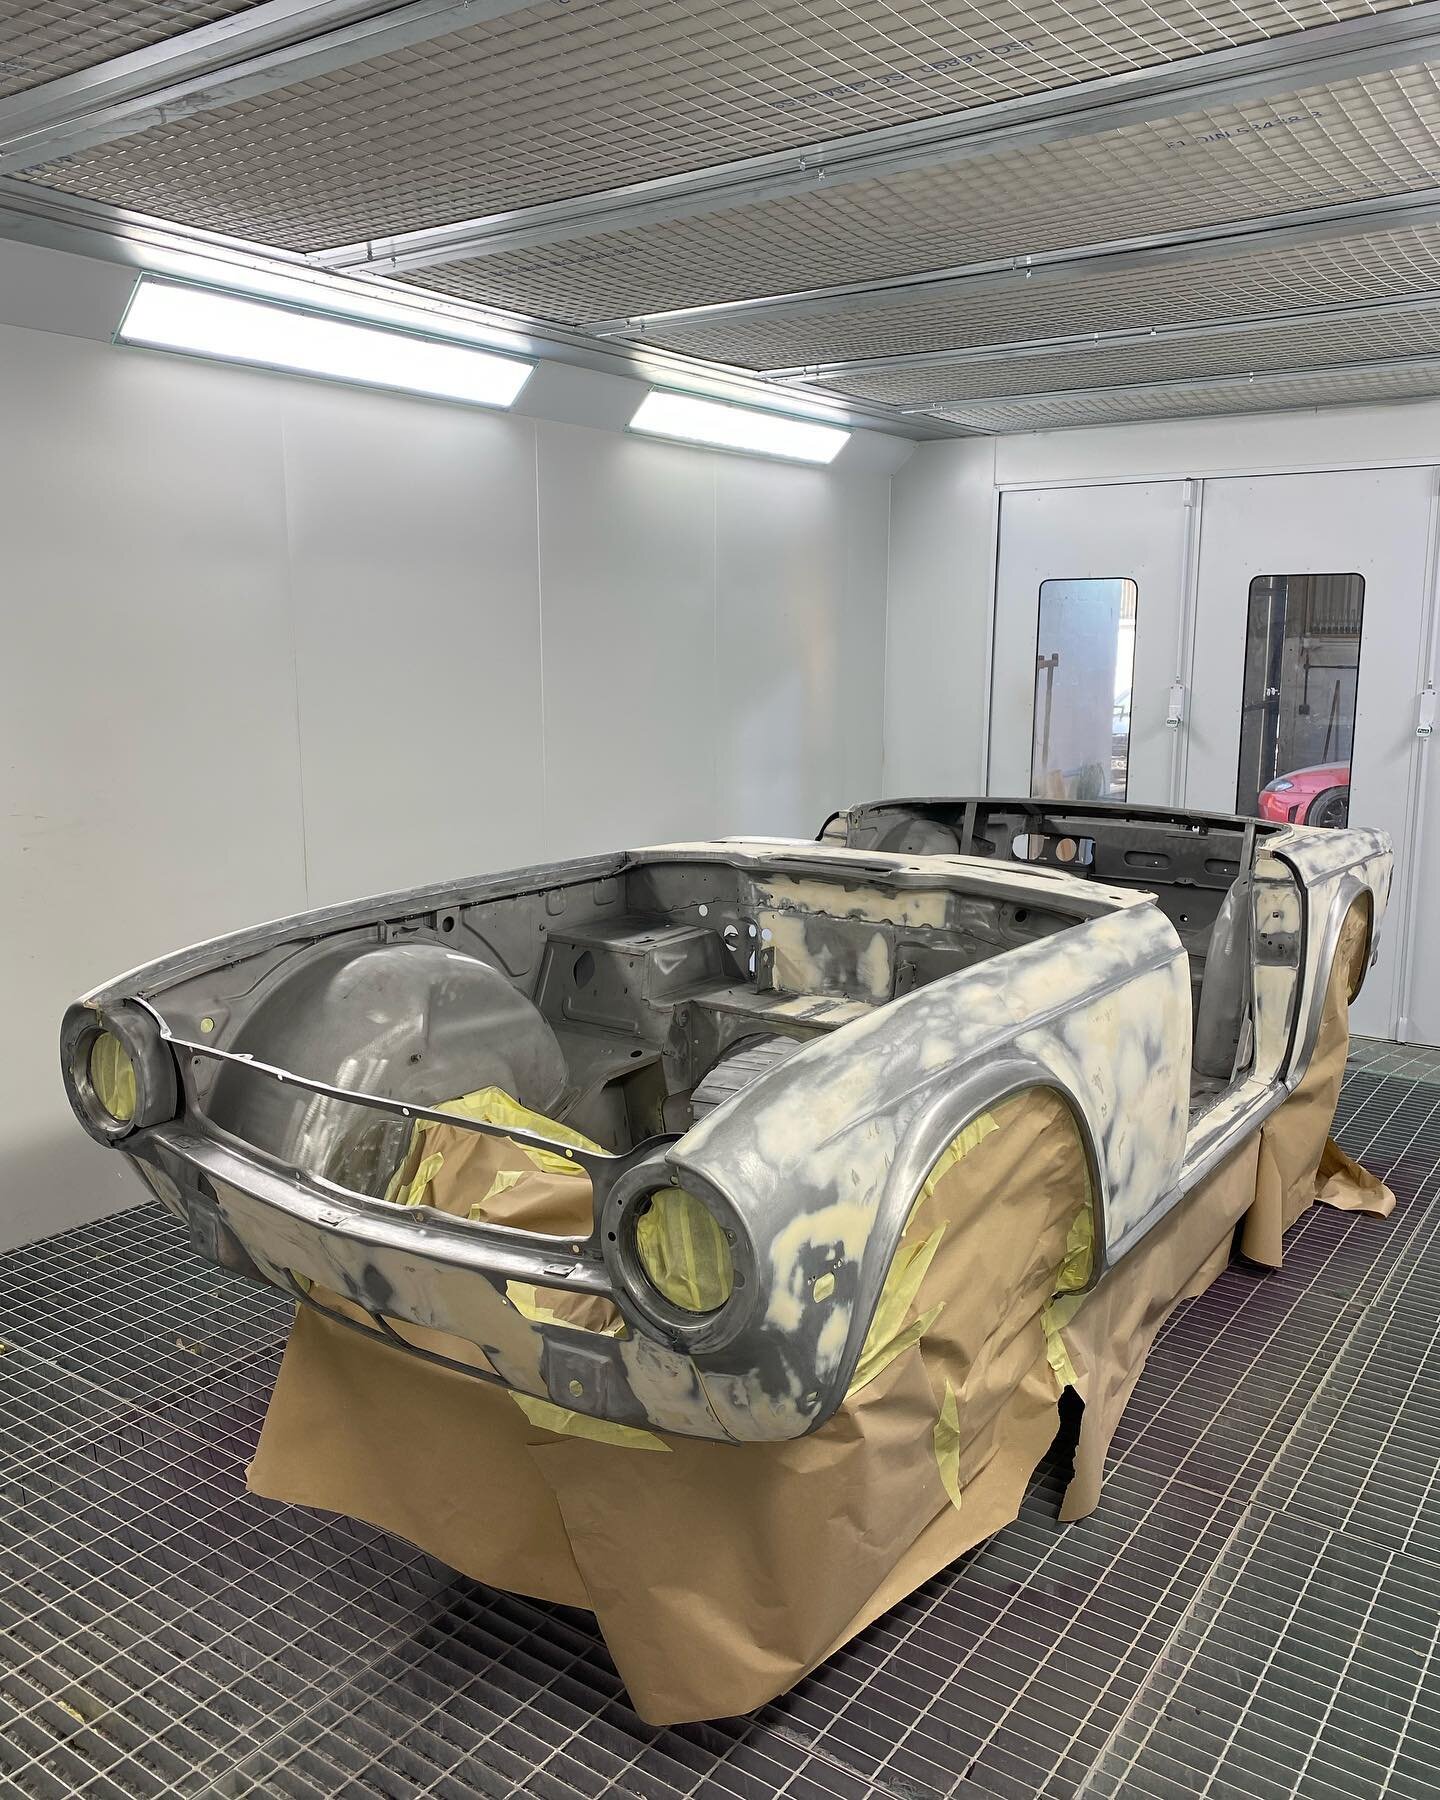 All sealed and primed&hellip;

After a few long weeks of preparation work this gorgeous #TriumphTr6 is now in epoxy primer. 

We will now begin rubbing down the epoxy primer and assessing every inch of the car to insure it&rsquo;s perfect before our 